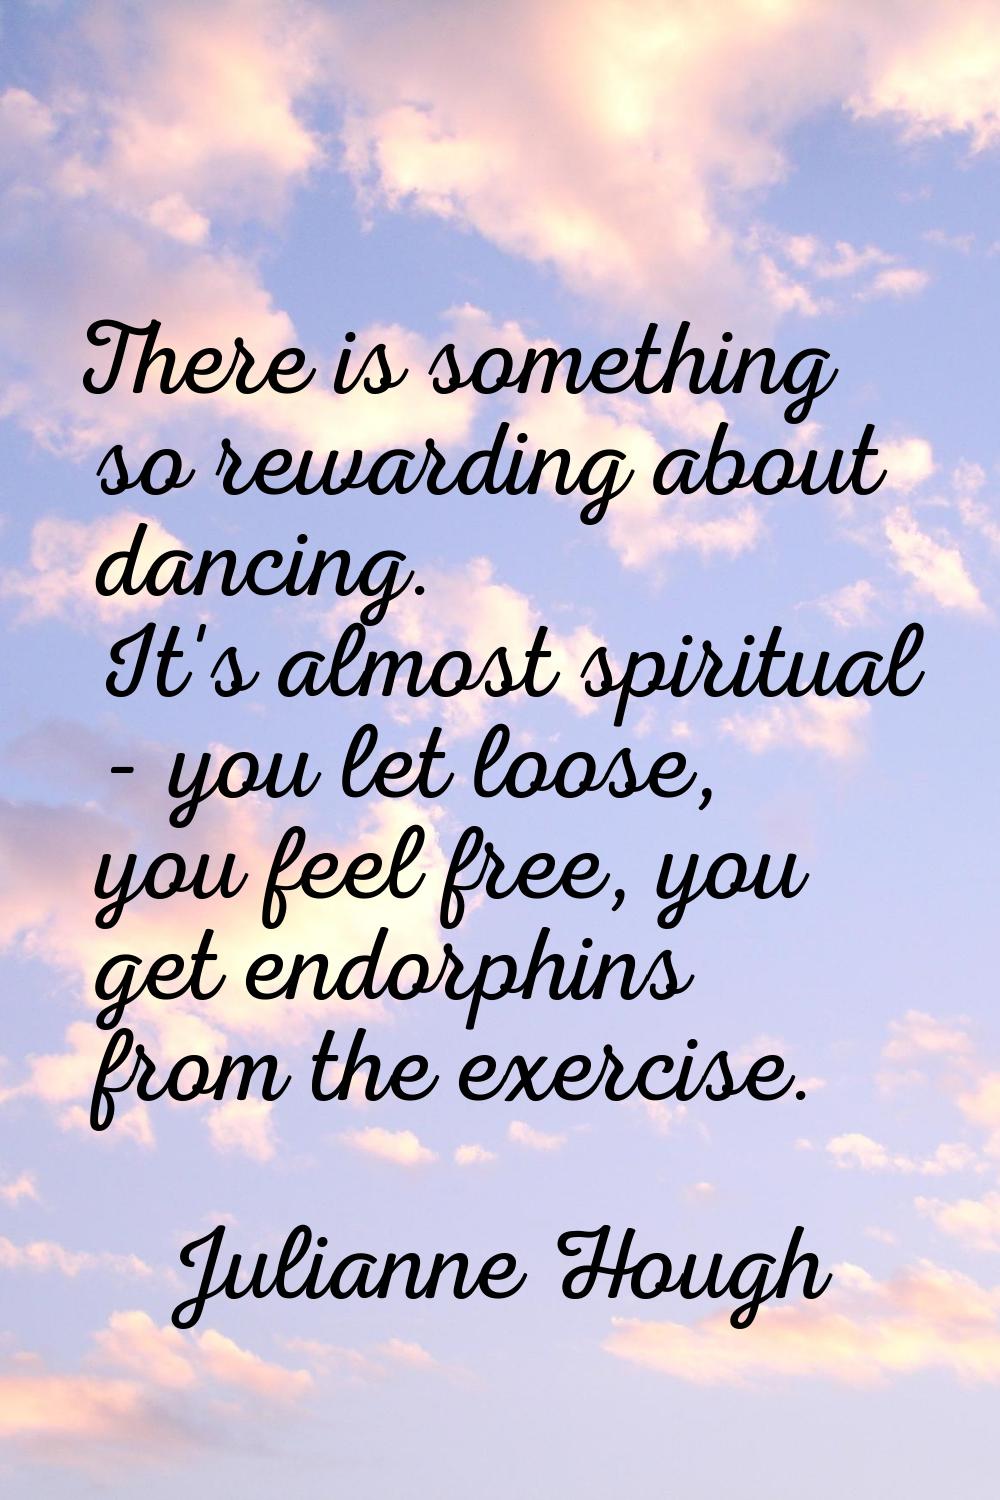 There is something so rewarding about dancing. It's almost spiritual - you let loose, you feel free